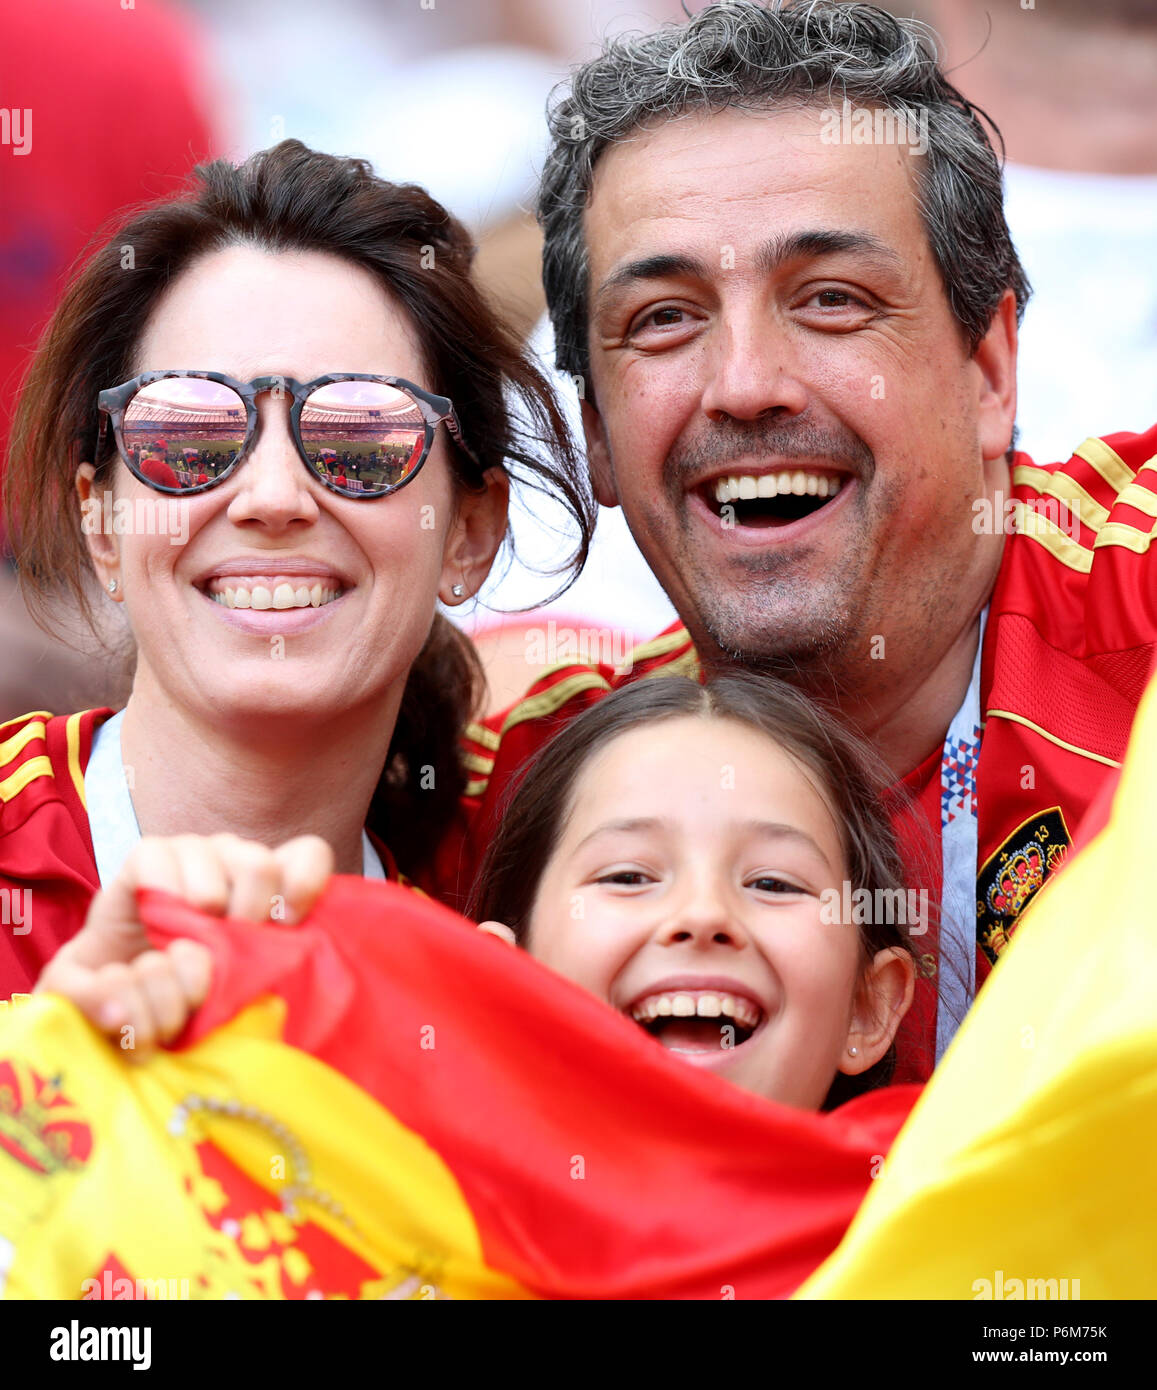 (180701) -- MOSCOW, July 1, 2018 (Xinhua) -- Fans cheer prior to the 2018 FIFA World Cup round of 16 match between Spain and Russia in Moscow, Russia, July 1, 2018. (Xinhua/Yang Lei) Stock Photo